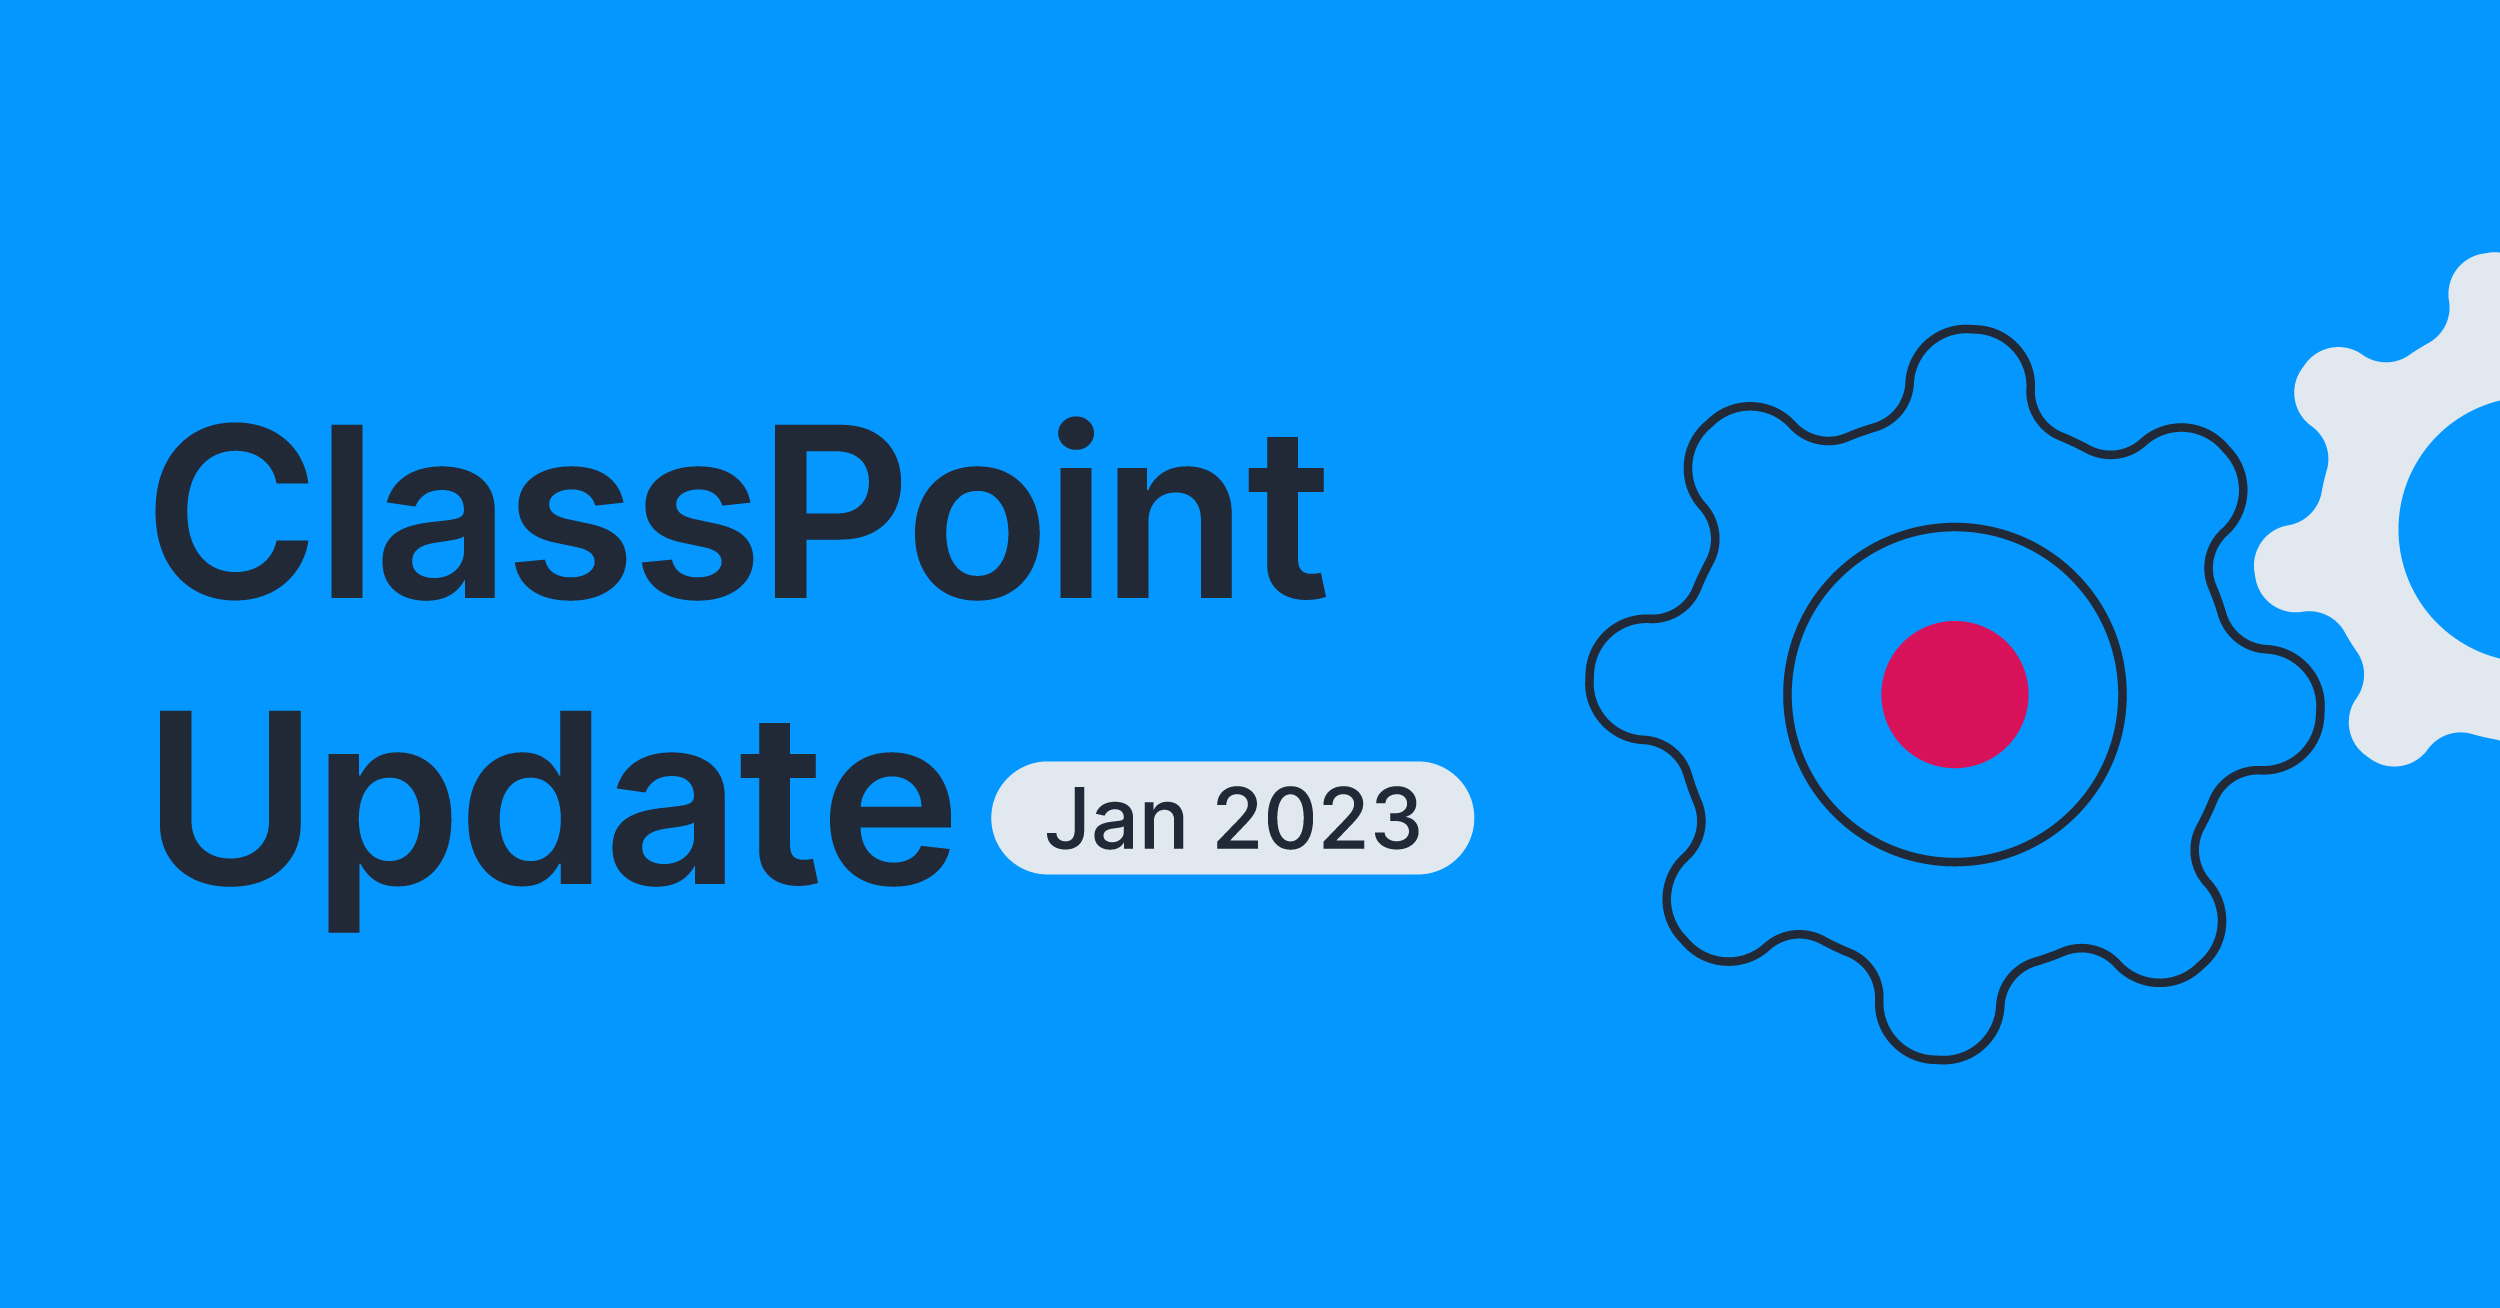 Welcome to ClassPoint, an Overview of What’s New